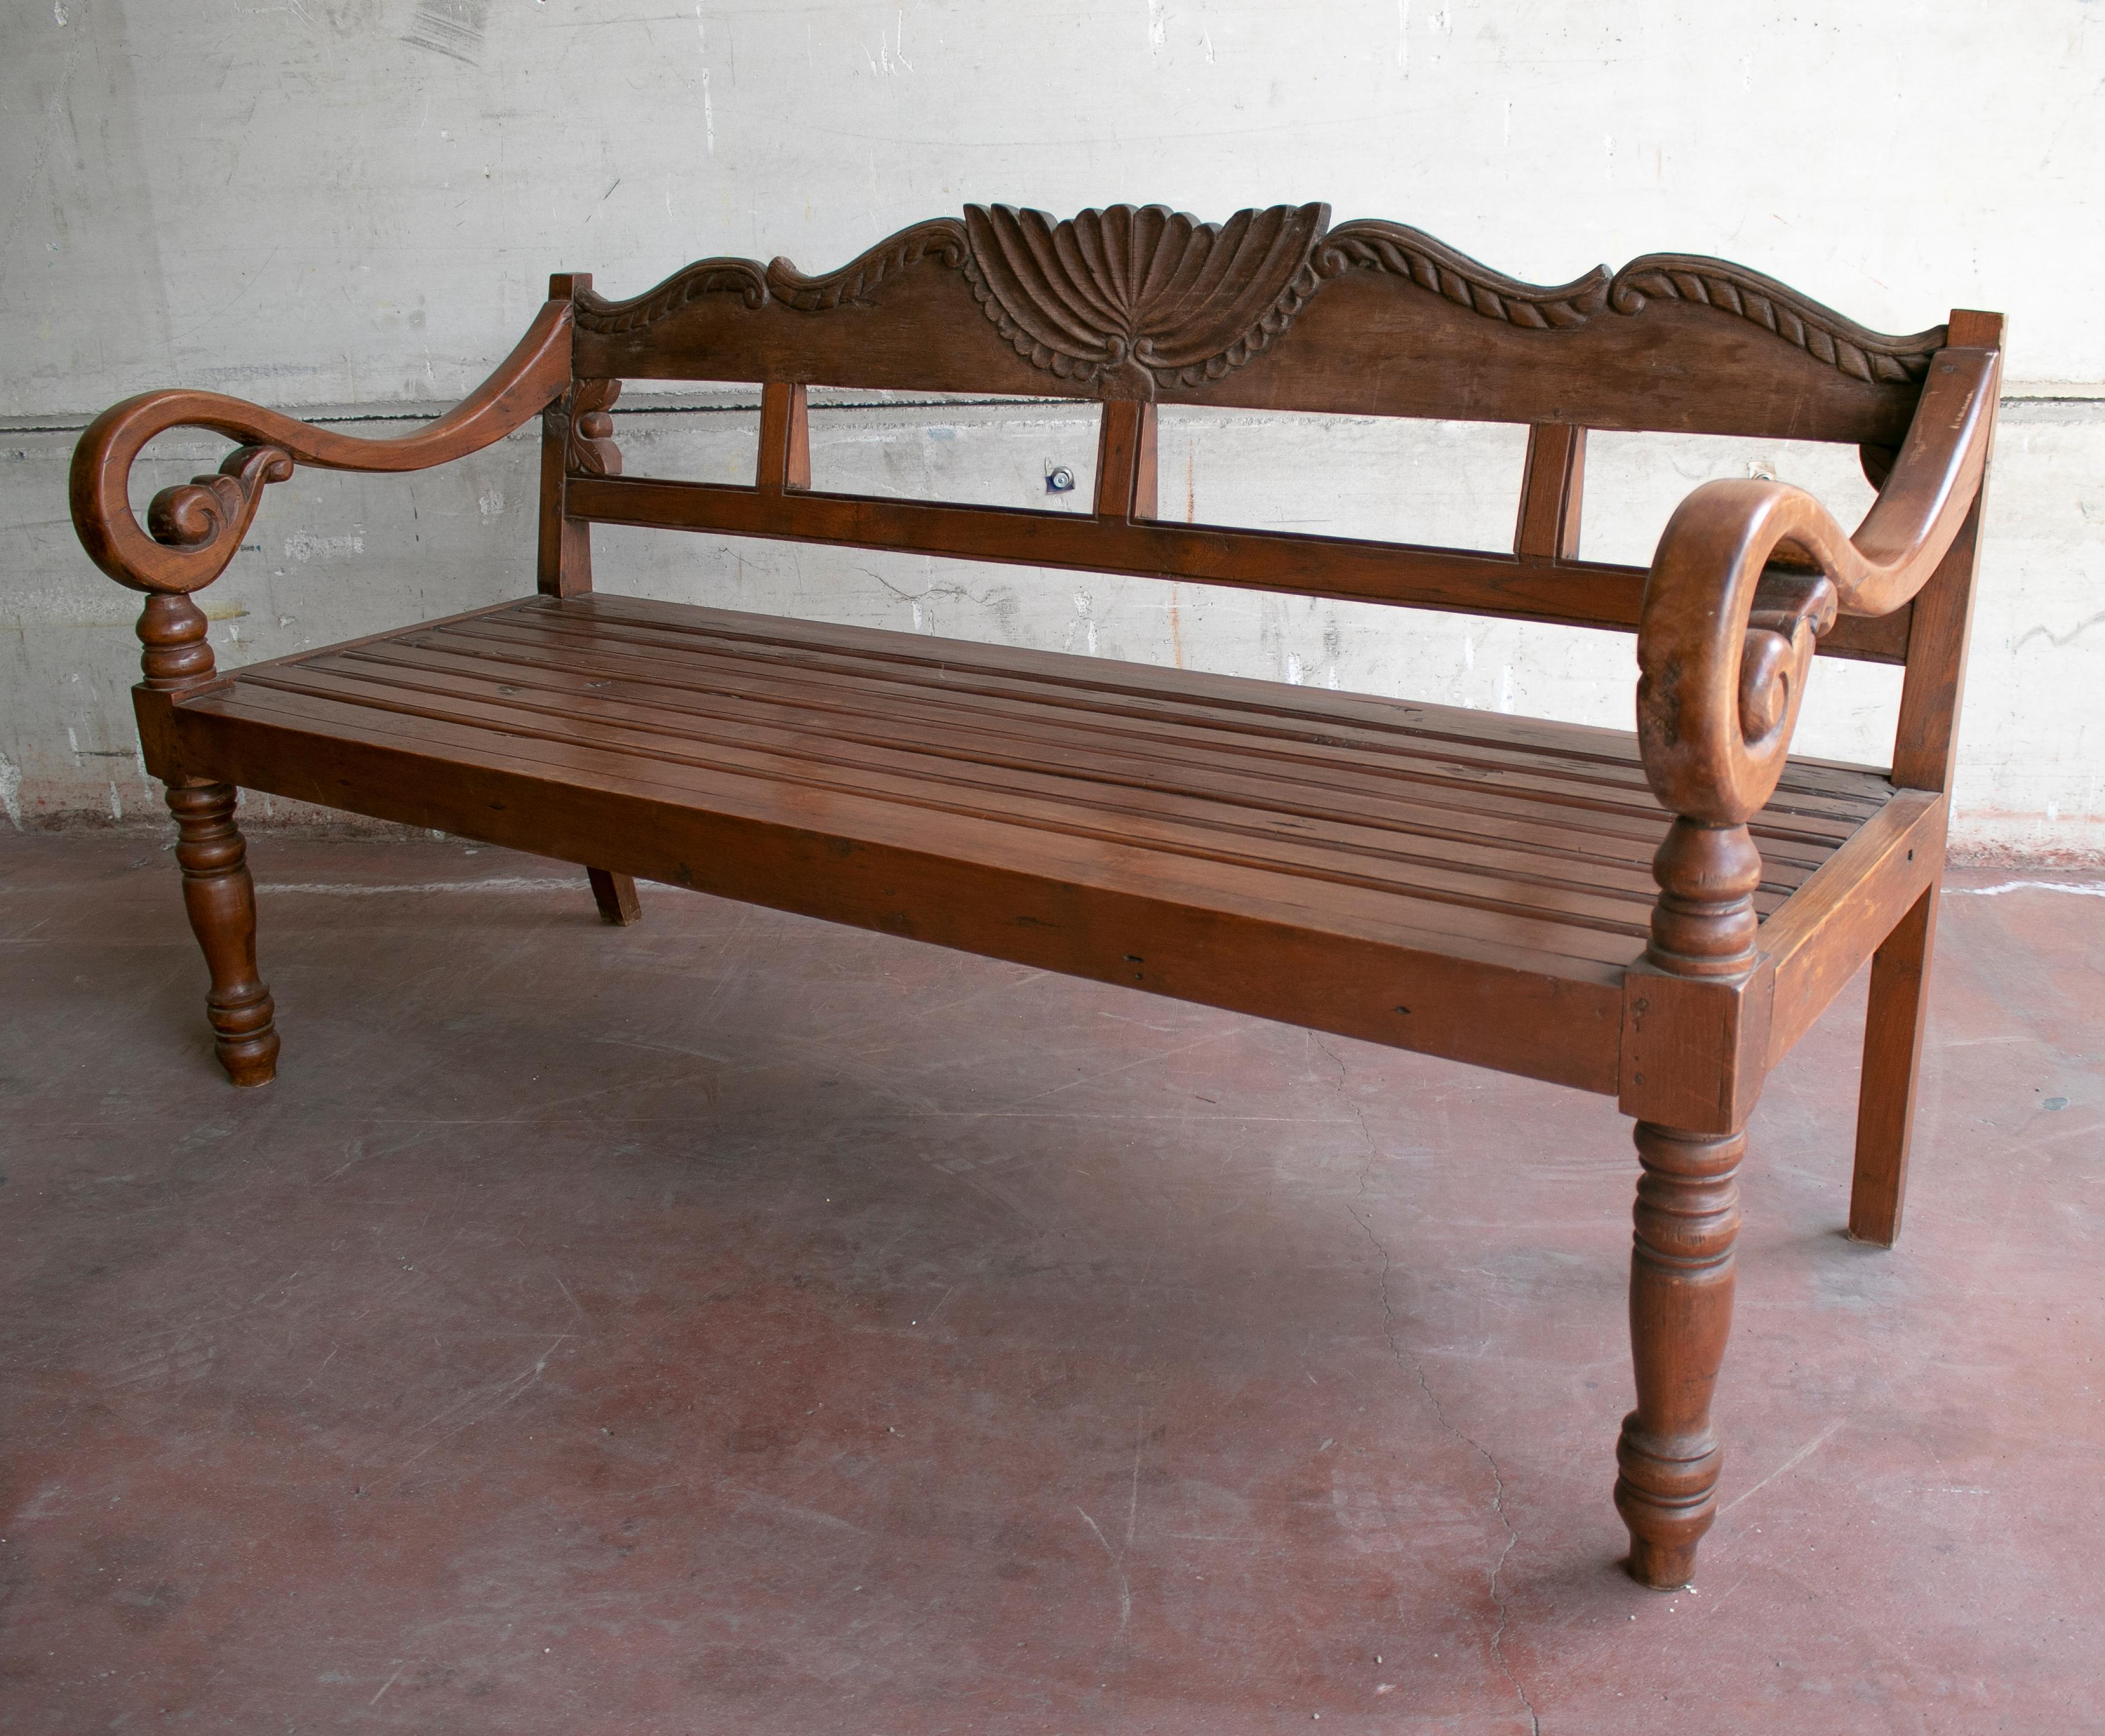 1990s Indonesian hand carved garden wooden seating bench.